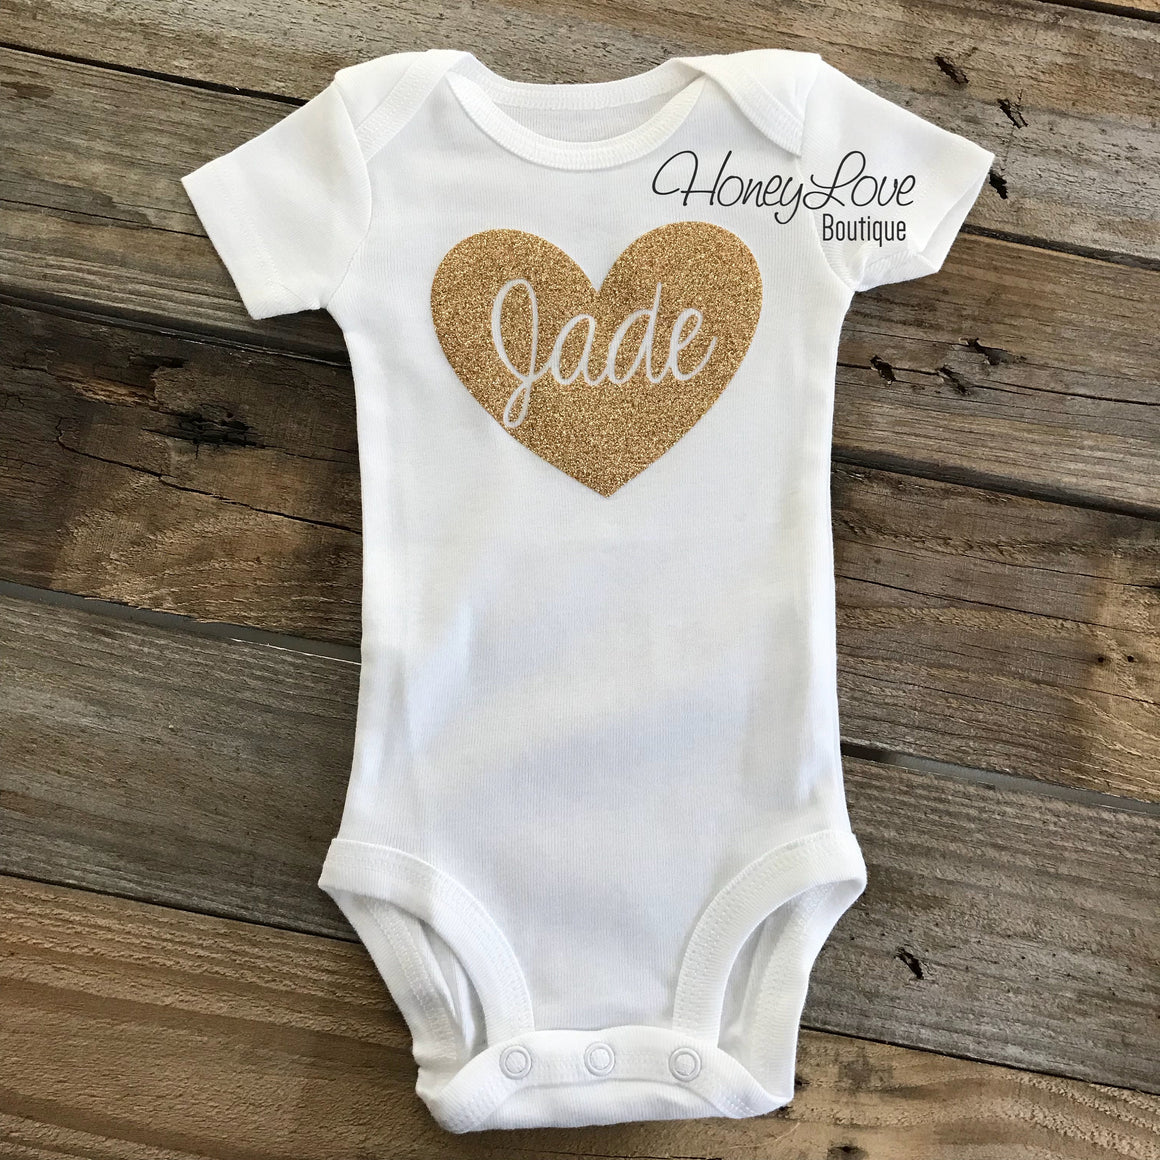 PERSONALIZED Name inside Heart - Gold glitter and Peach - embellished tutu skirt bloomer - HoneyLoveBoutique